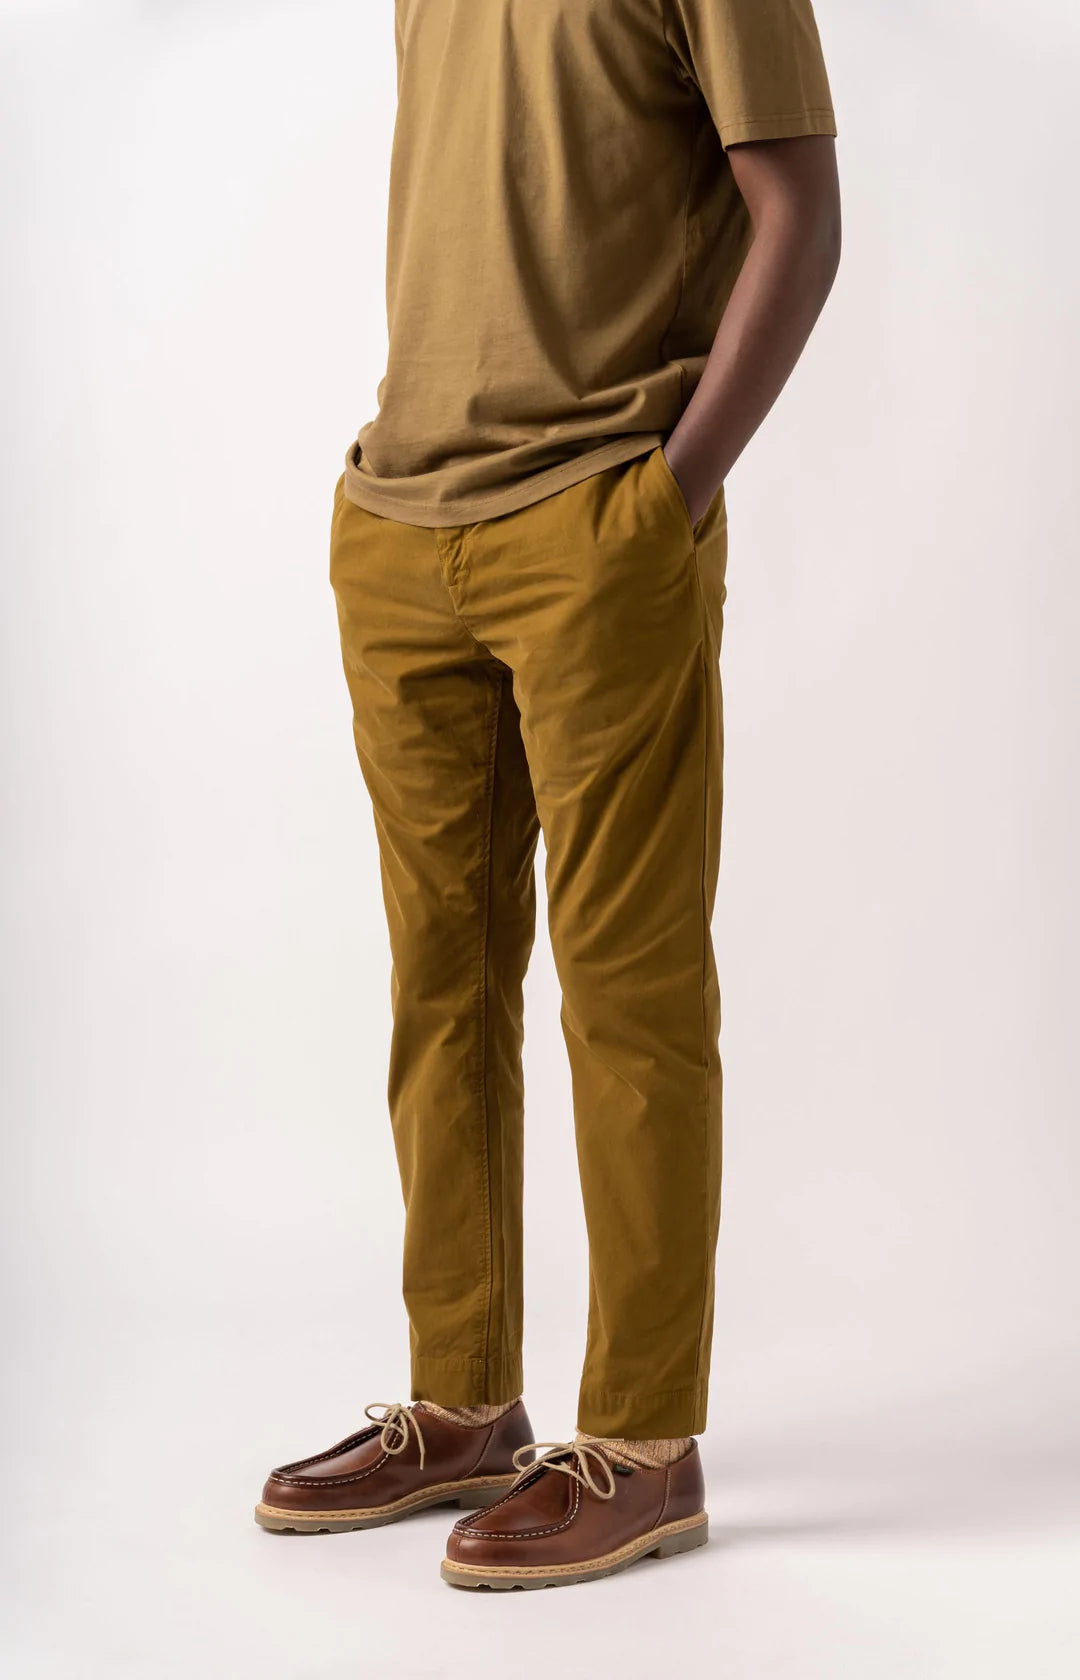 INVERNESS TAPERED COTTON TWILL PANTS - TOBACCO